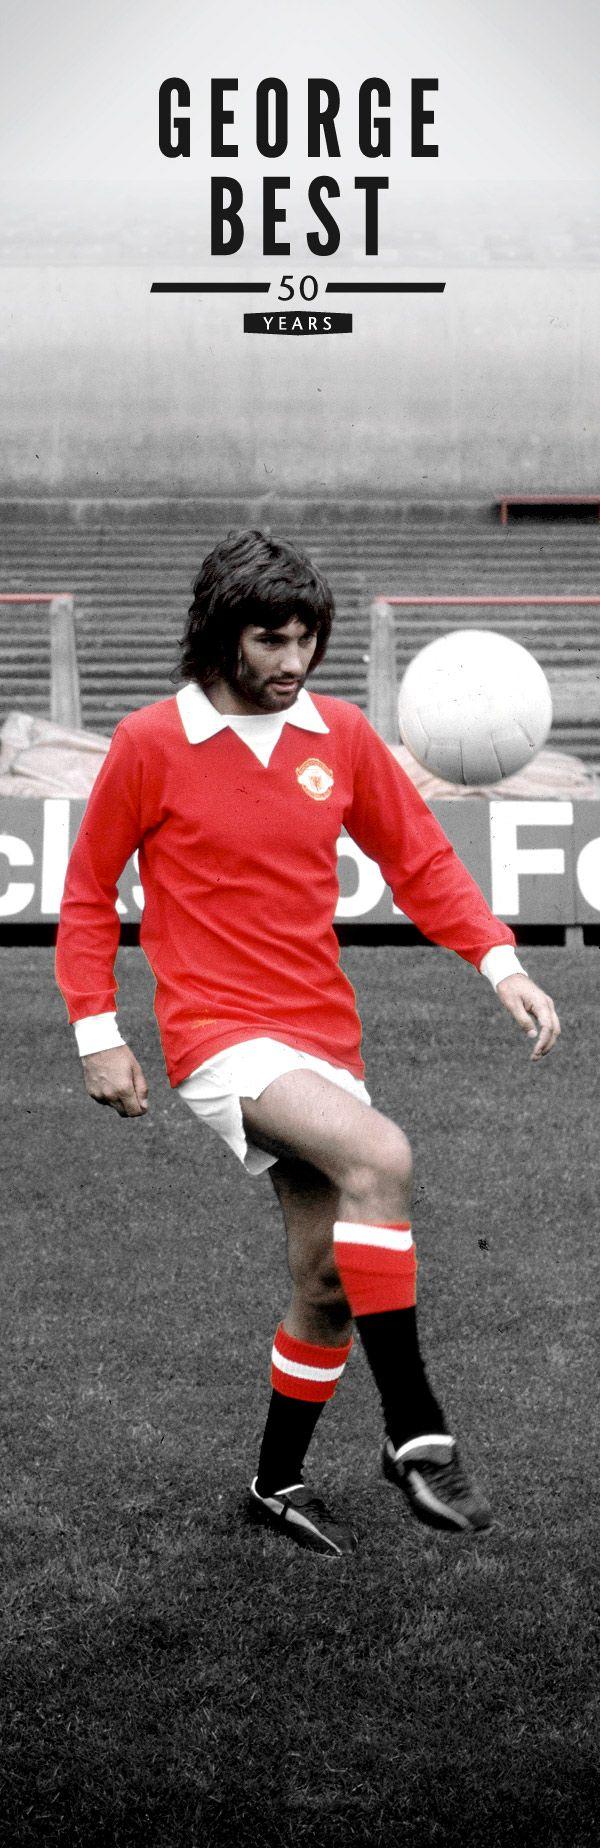 George Best: My career highlights Manchester United Website